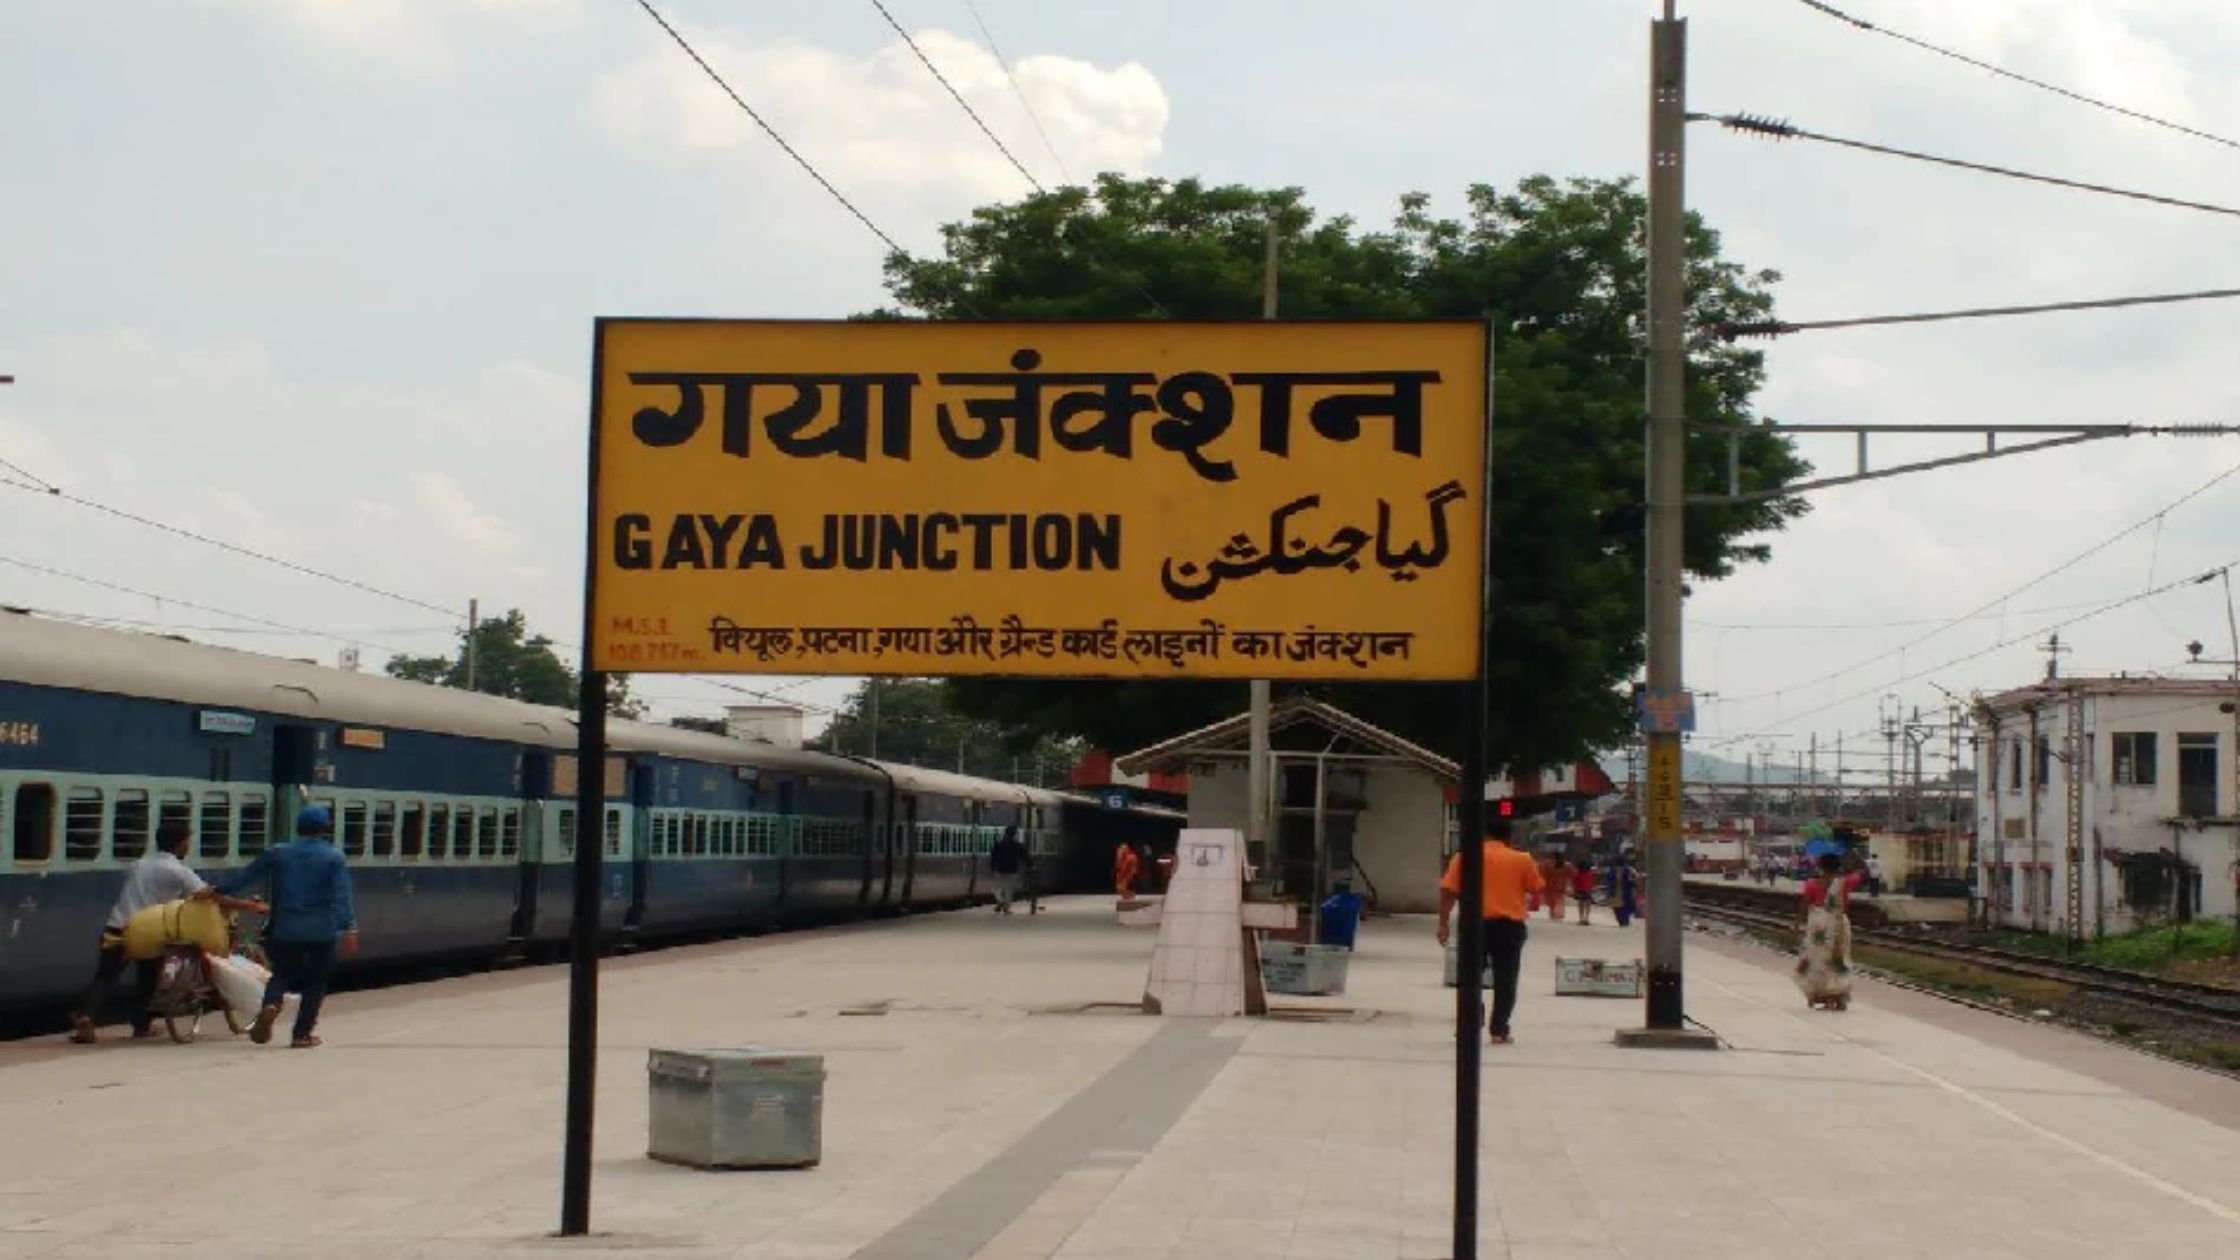 Separate buildings will be constructed for arrival and departure at Gaya Junction.